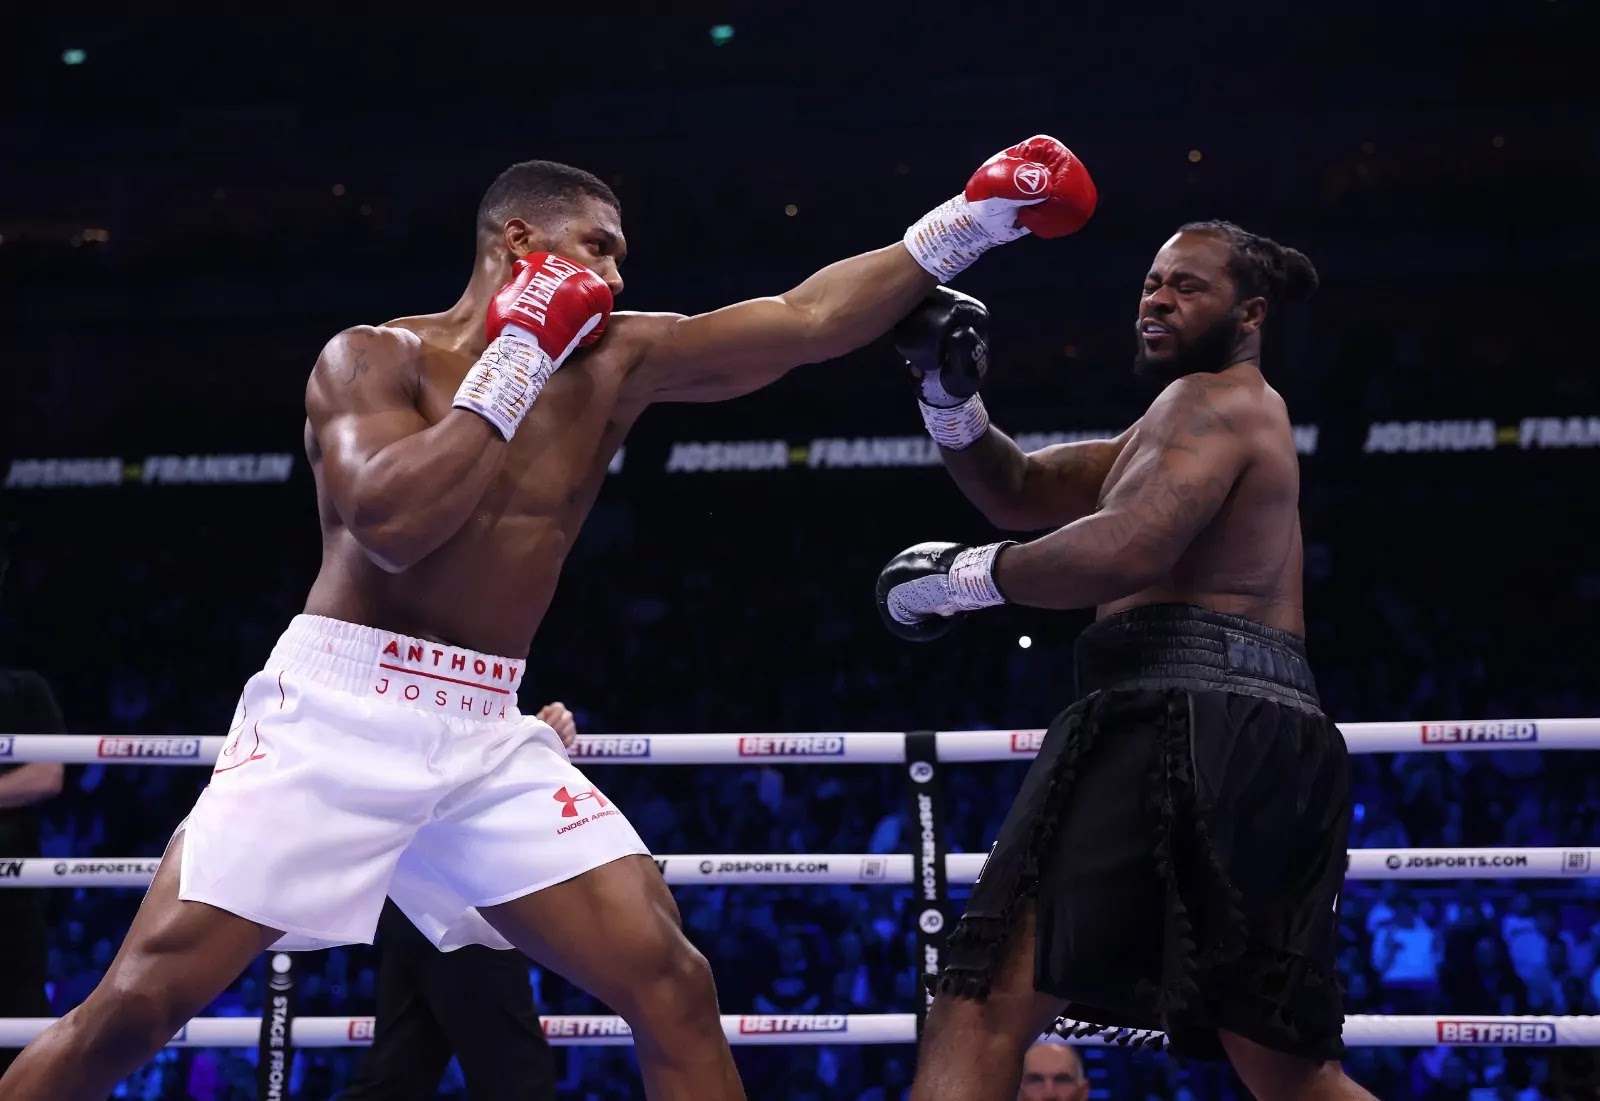 Anthony Joshua vs Jermaine Franklin A Thrilling Heavyweight Boxing Match